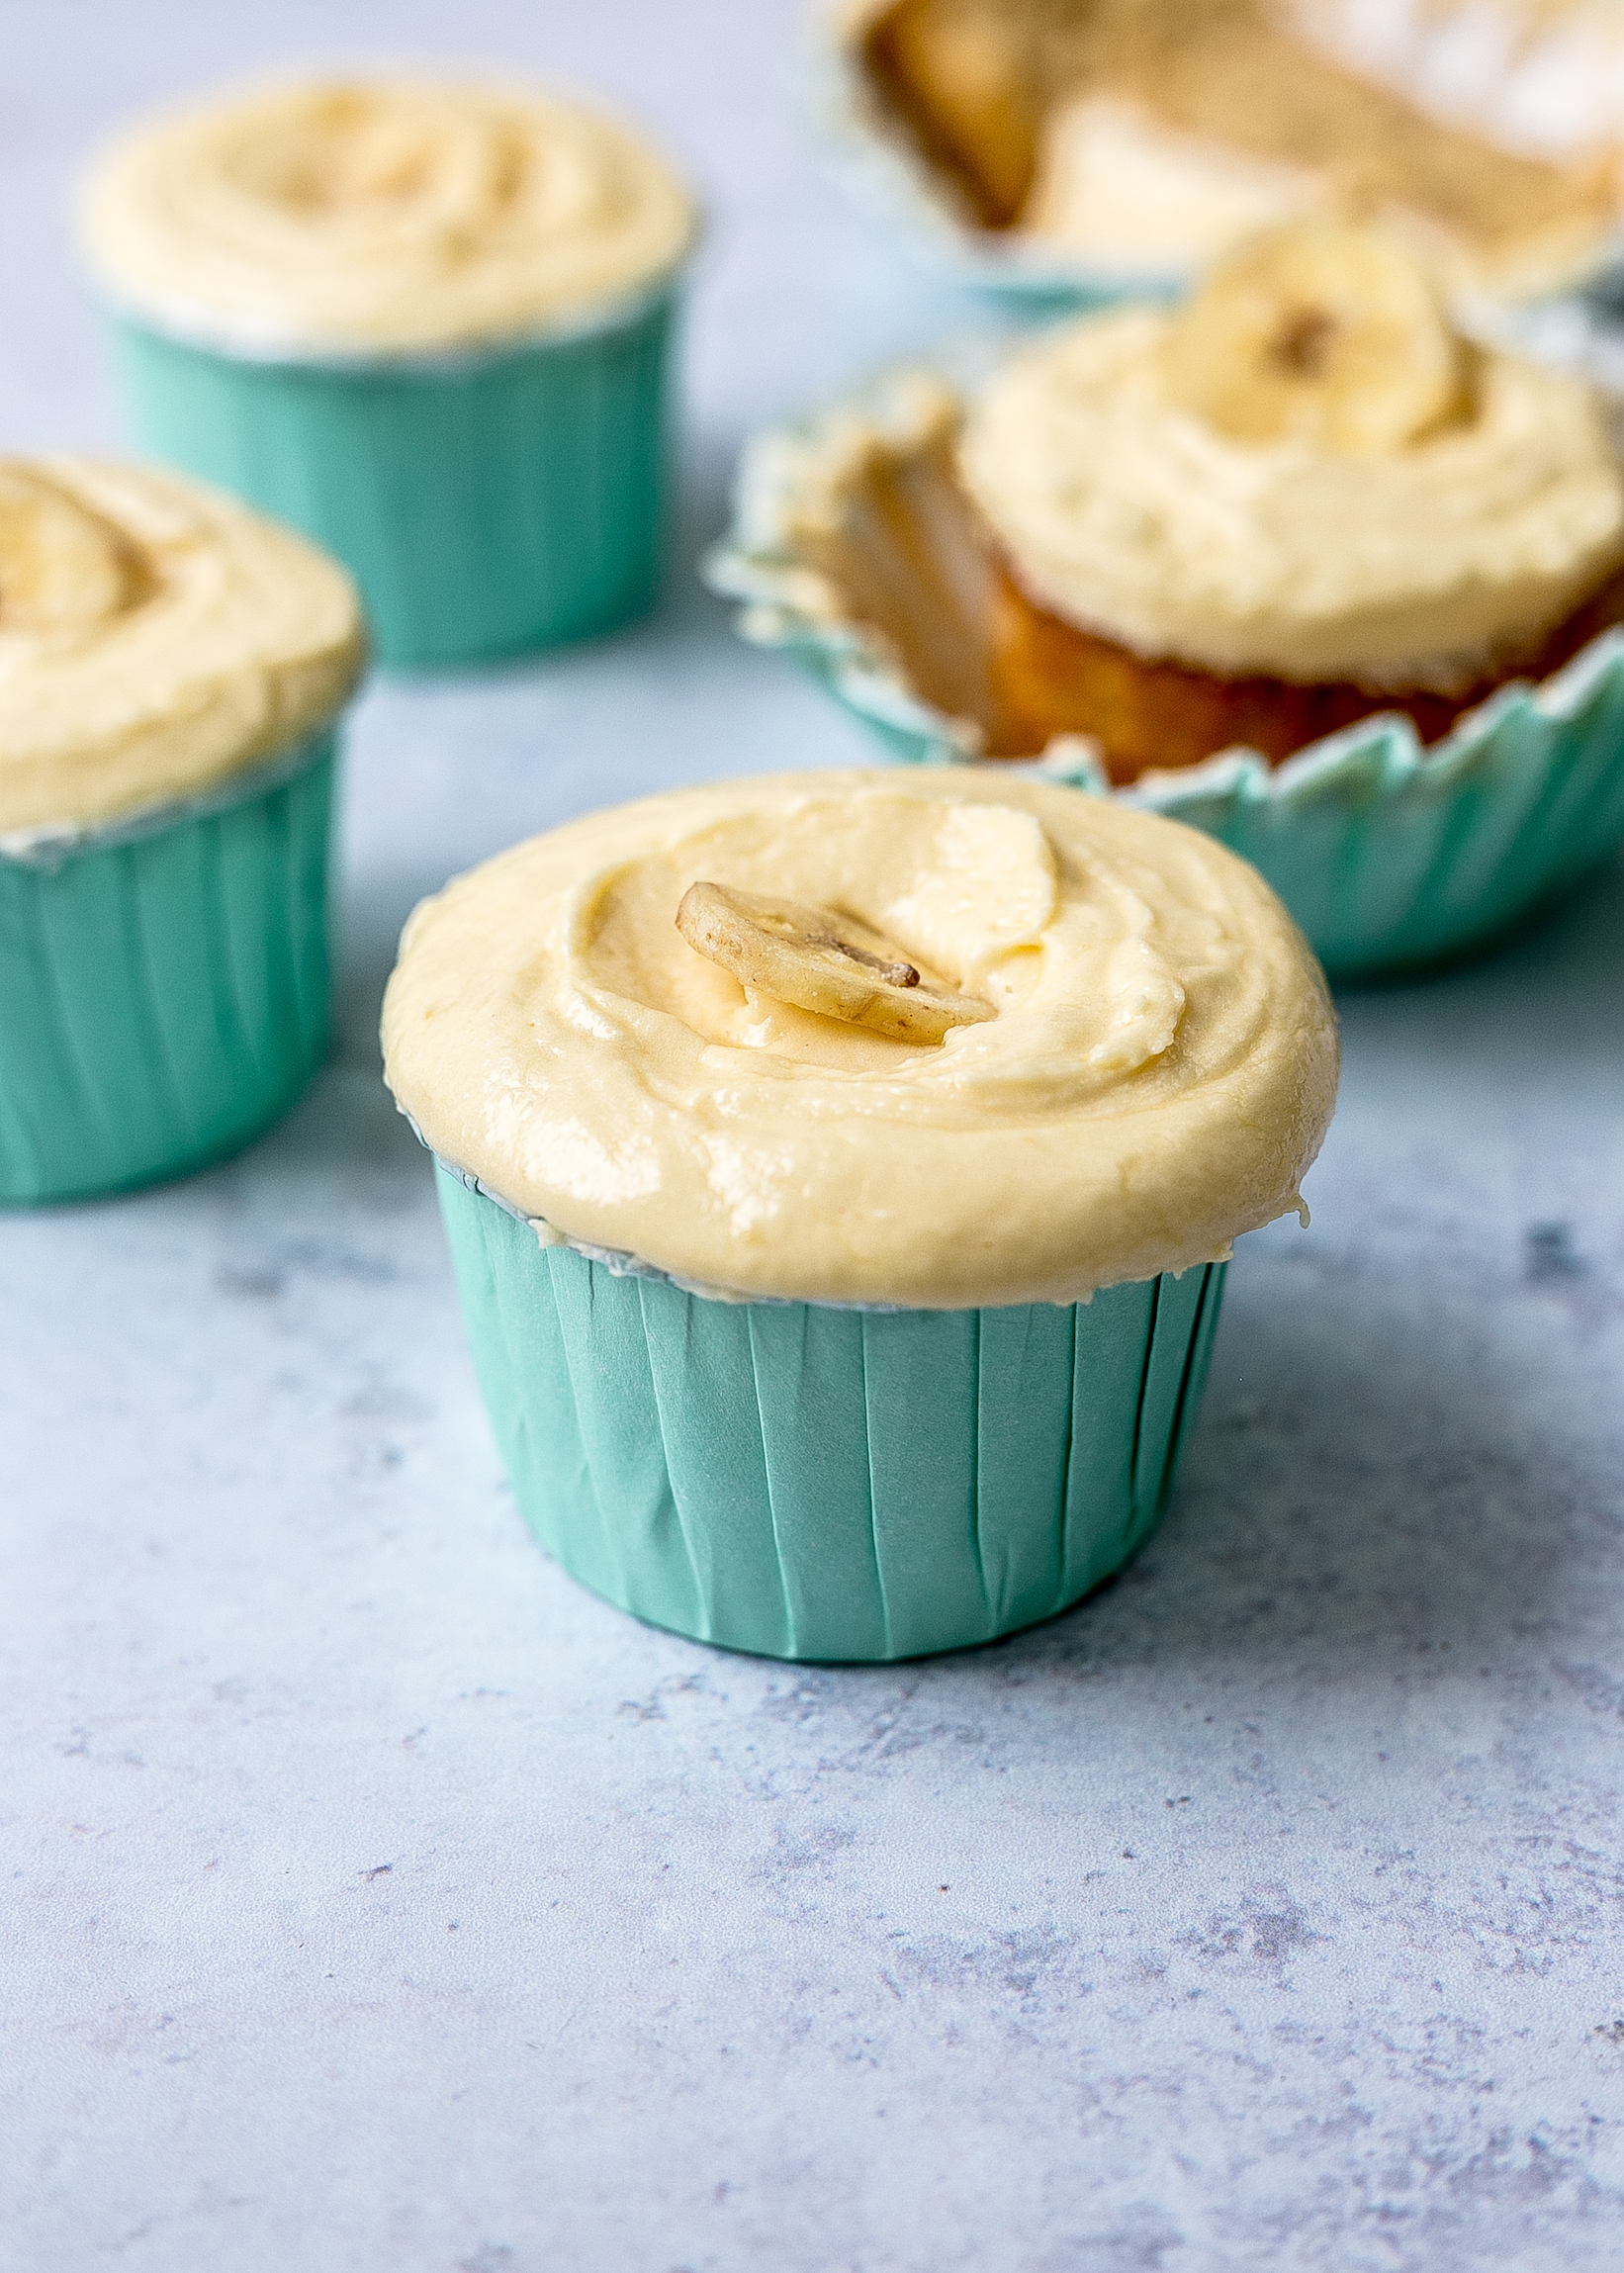 FODMAP friendly banana cupcakes with peanut butter icing